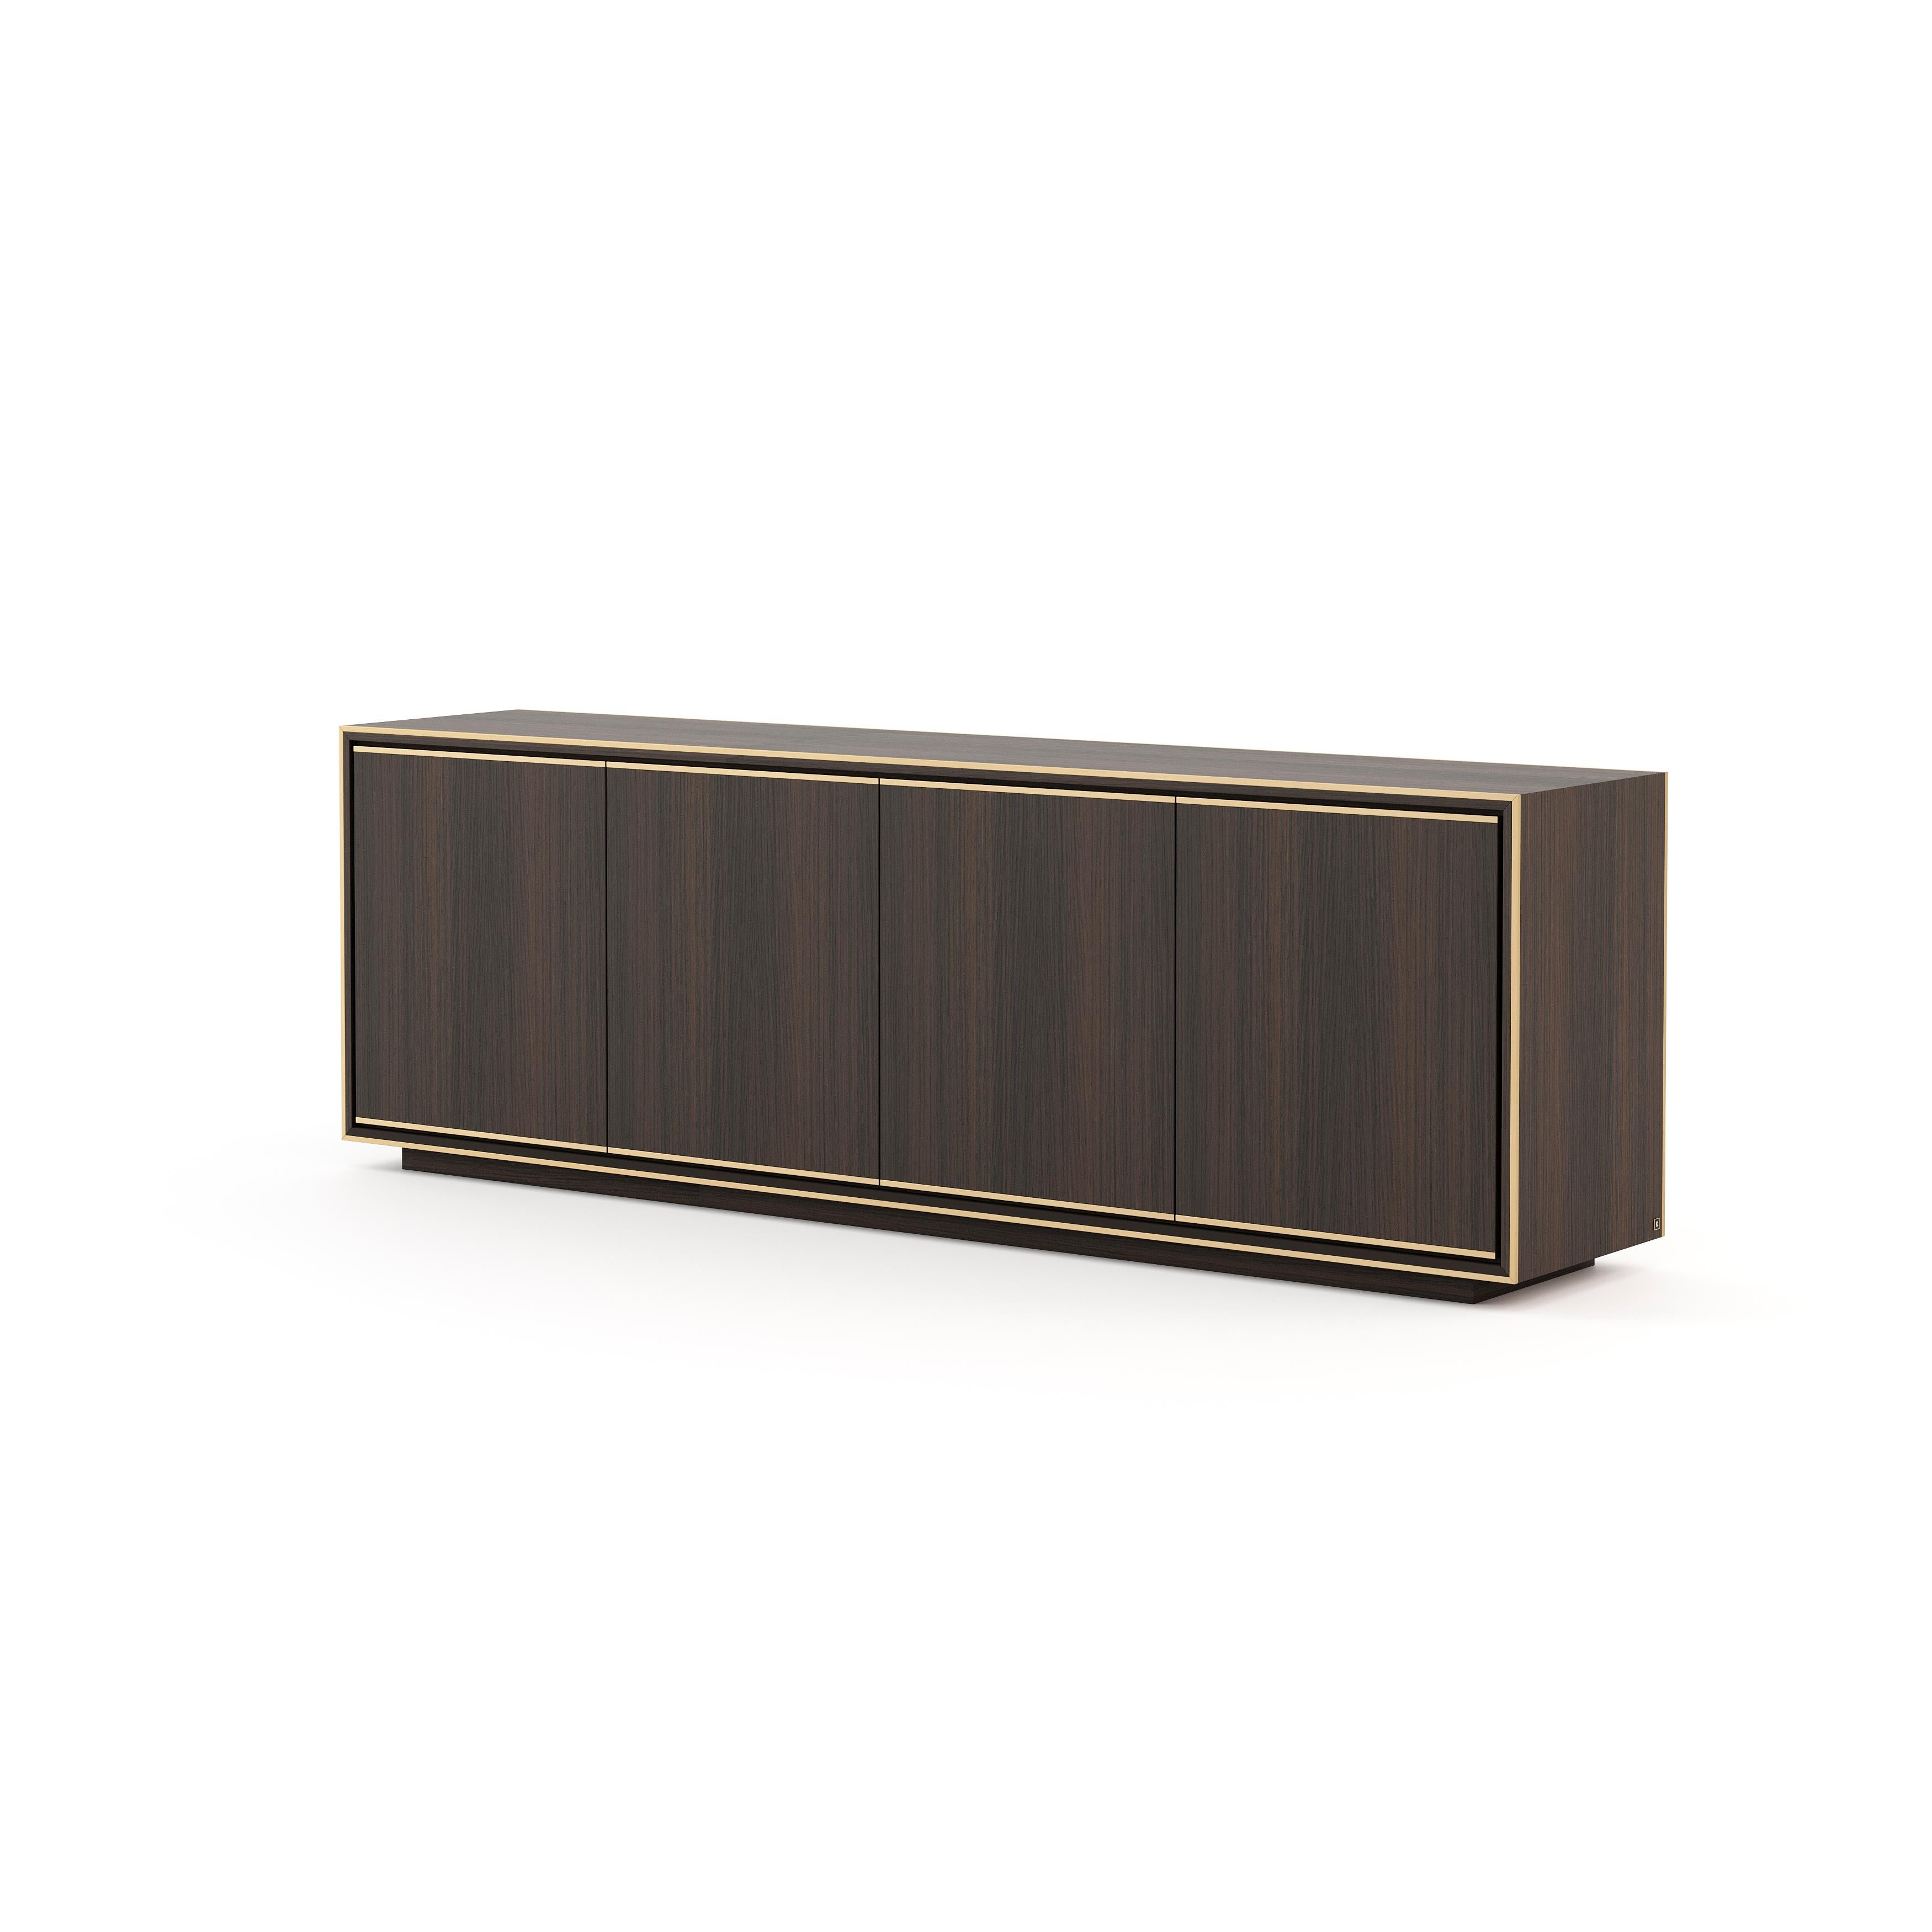 The Rick sideboard is that statement piece that will define the entire dining room concept. This storage solution made of wood, with four doors, creates a gathering space in a room or a corner of the living room to mingle with family and friends.

*